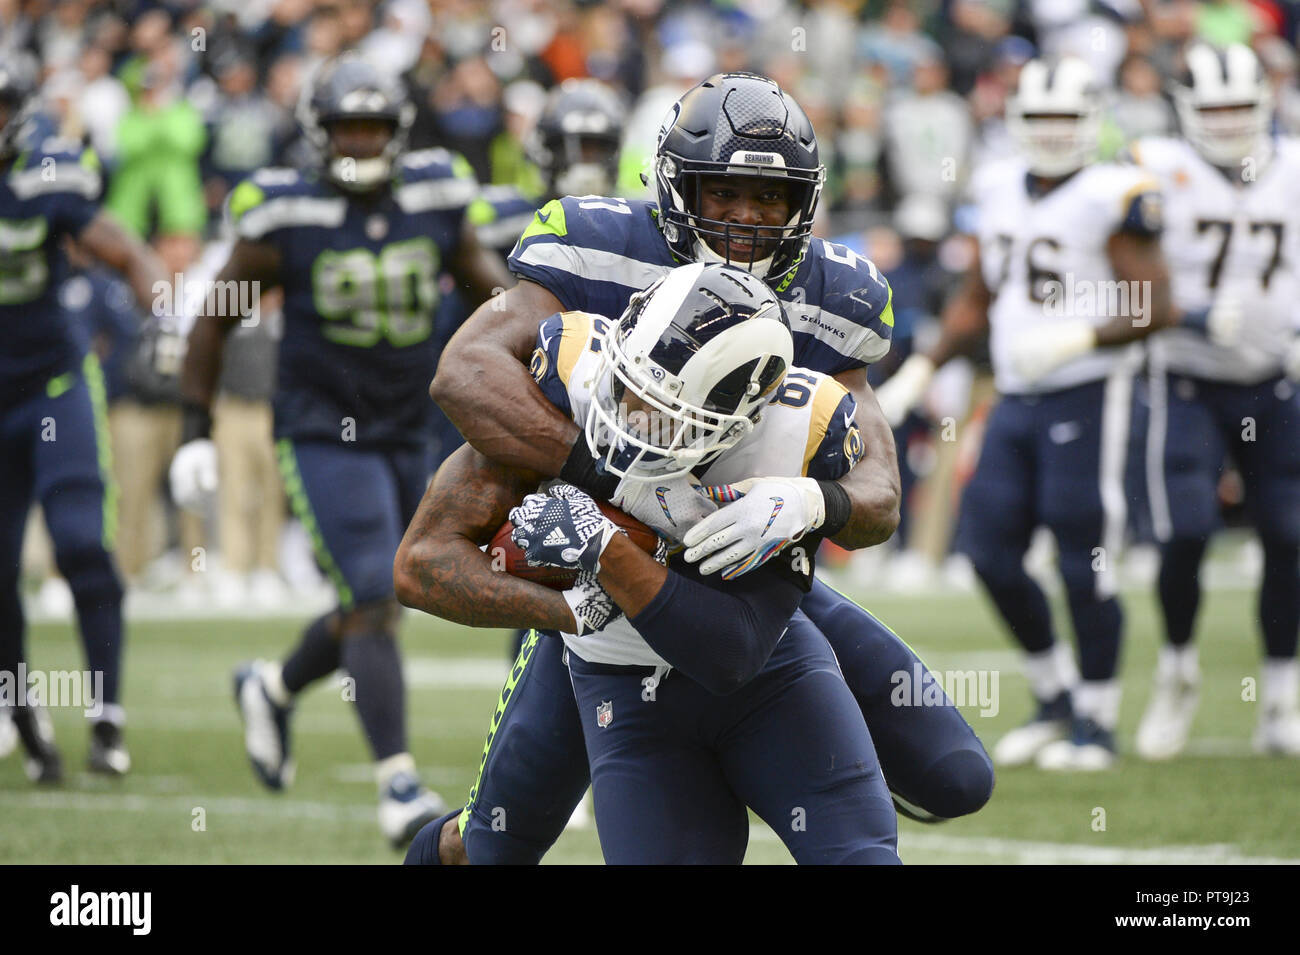 Seattle, Washington, USA. 7th Oct, 2018. The Rams GERALD EVERETT (81) is tackled by BARKEVIOUS MINGO (51) as the Los Angeles Rams beat the Seattle Seahawks 33-31 in a NFC West game at Century Link Field in Seattle, WA. Credit: Jeff Halstead/ZUMA Wire/Alamy Live News Stock Photo